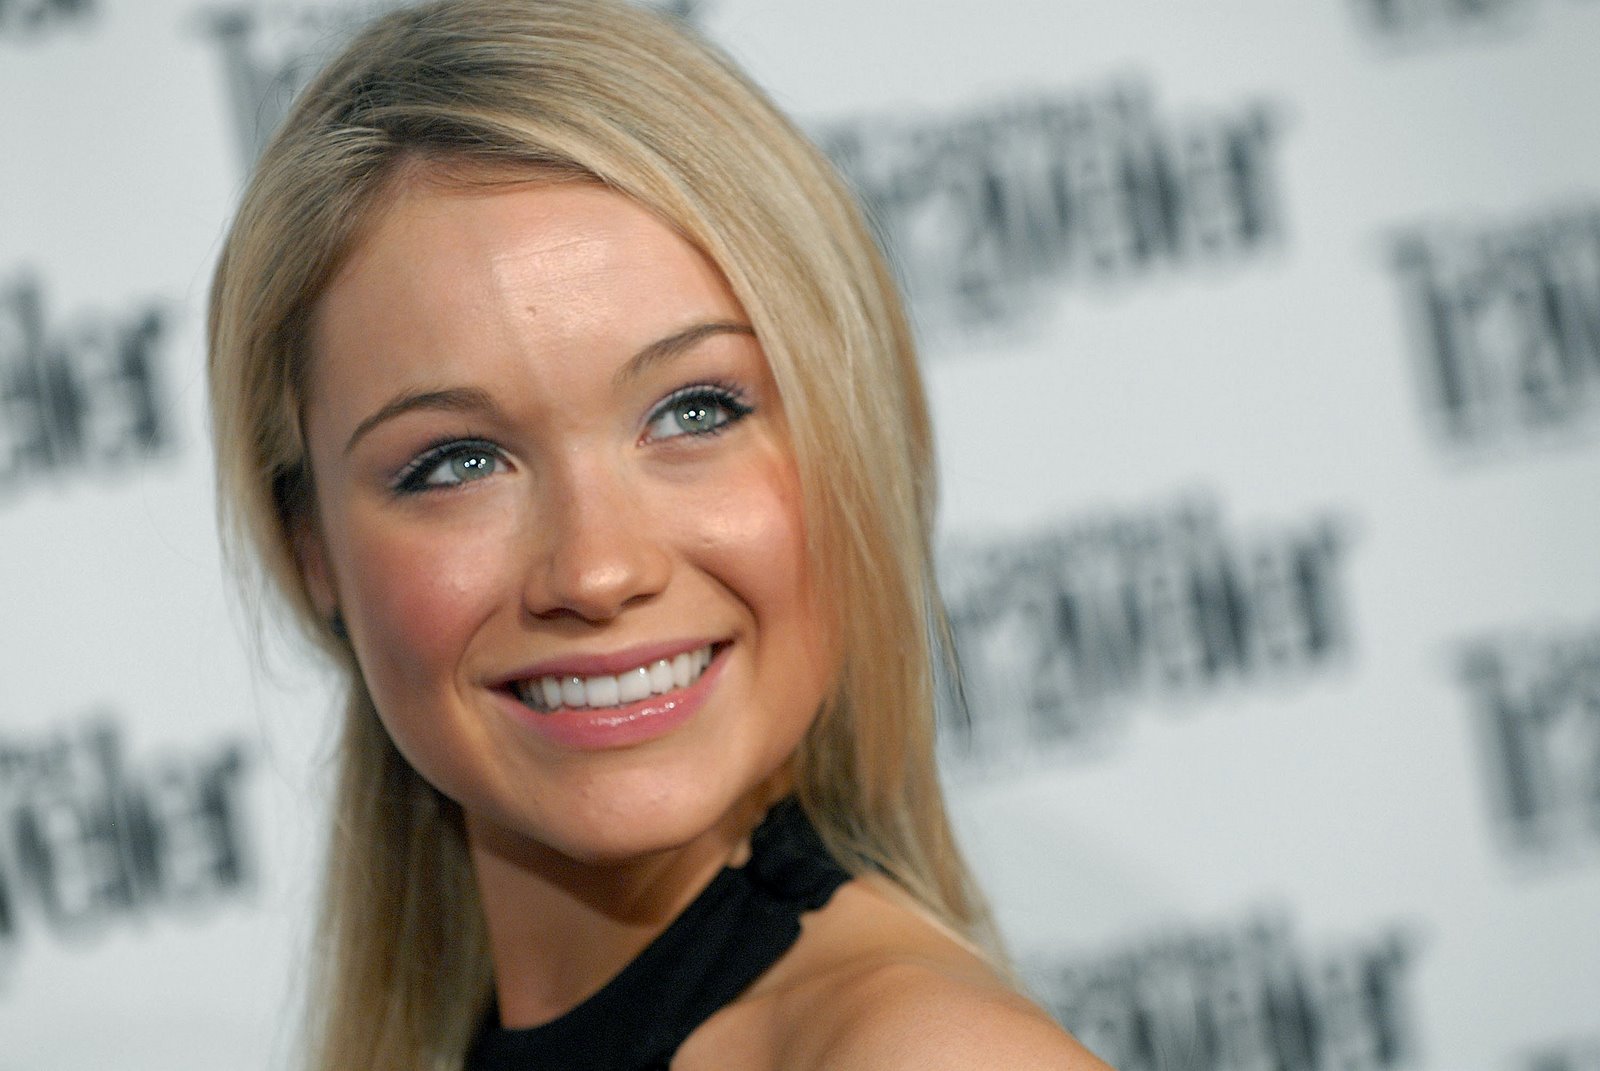 Amazing Katrina Bowden Smiling Face Background Mobile Free Hd Photos Download